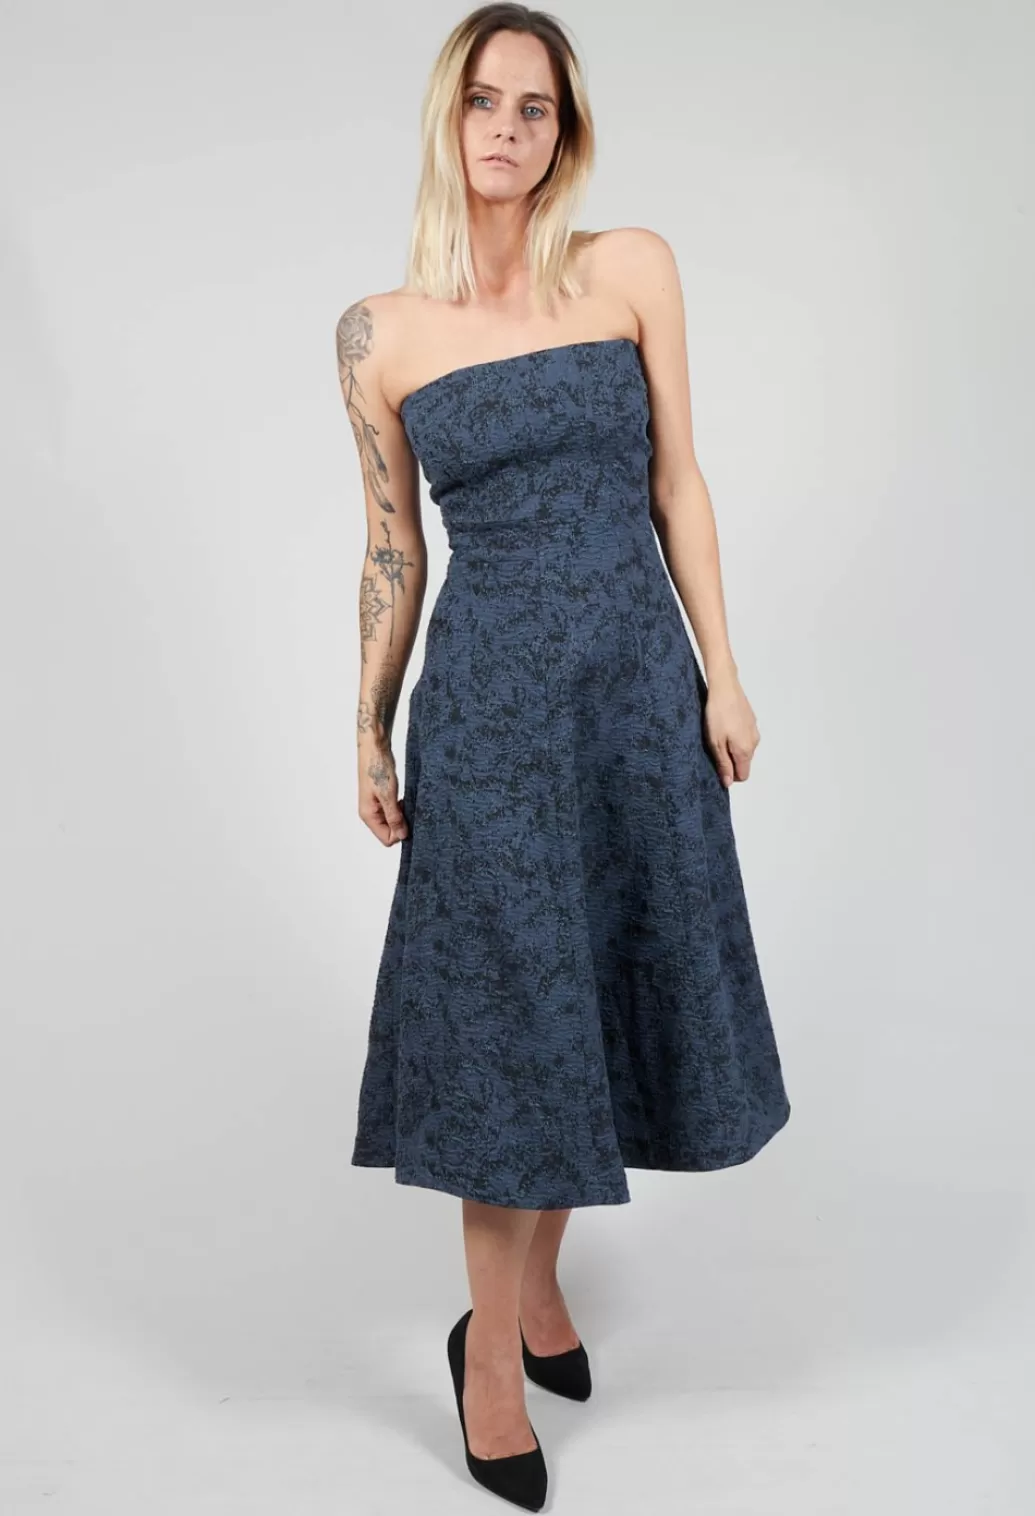 Dresses^Lilith Strapless Dress With Textured Pattern And Flared Skirt In Ink